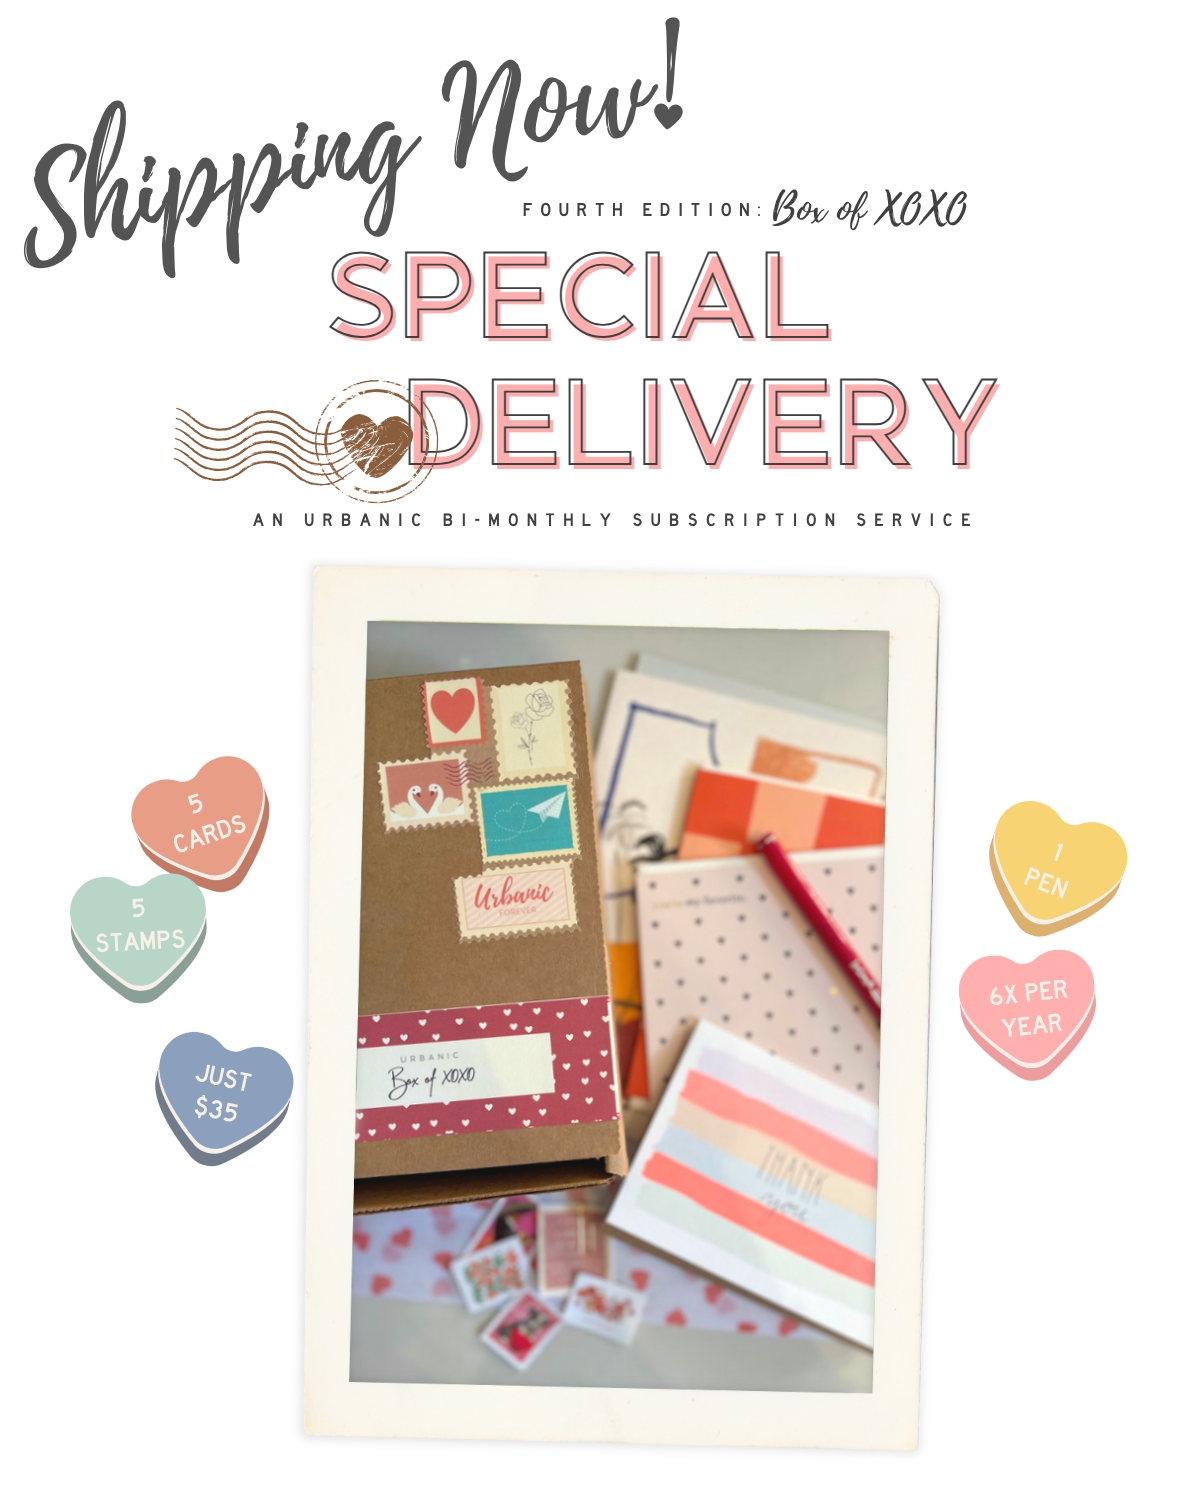 urbanic paper boutique los angeles california gifts stationery special delivery bi-monthly subscription service loot box valentines xoxo greeting cards